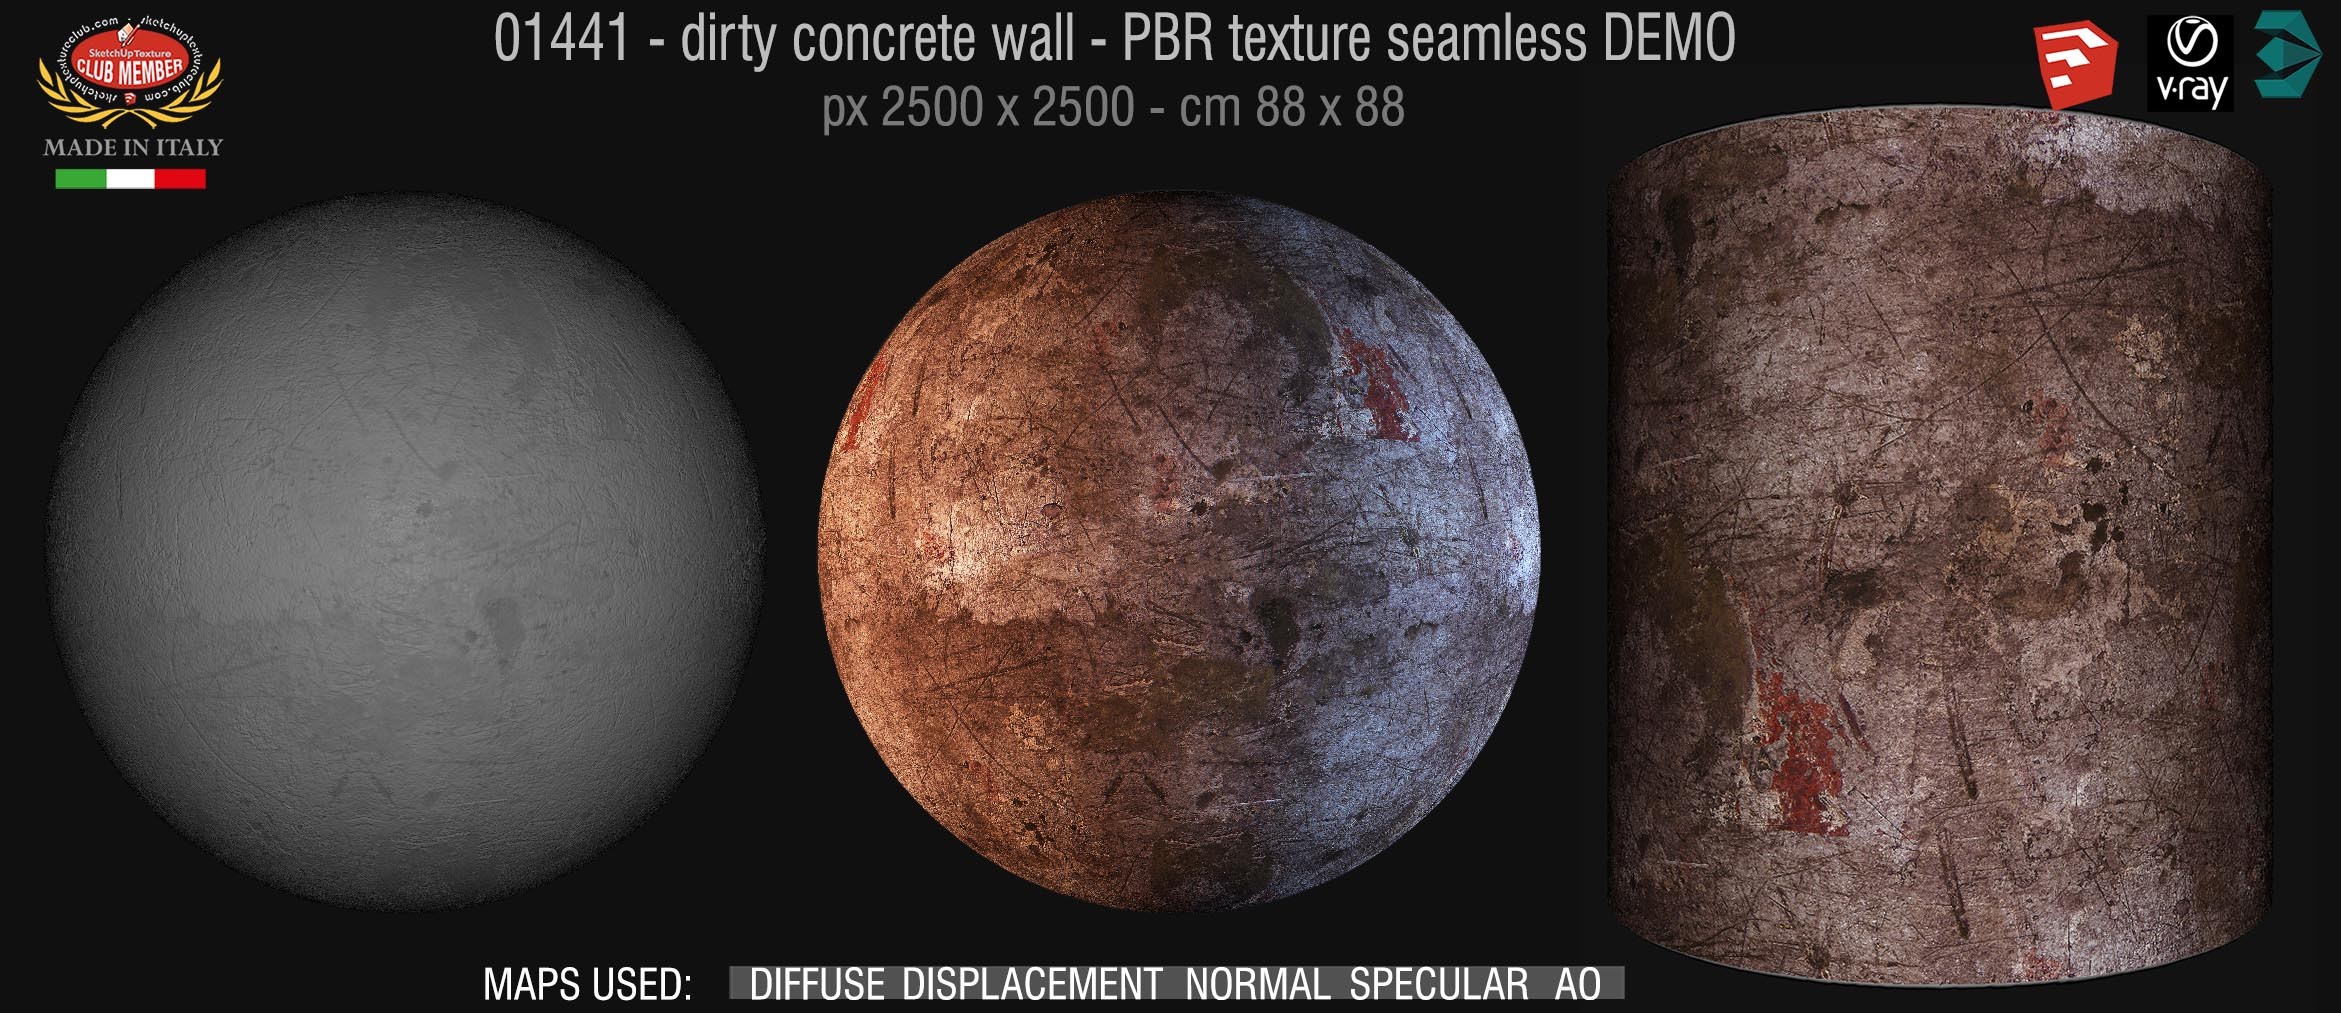 01441 Concrete bare dirty wall PBR texture seamless DEMO